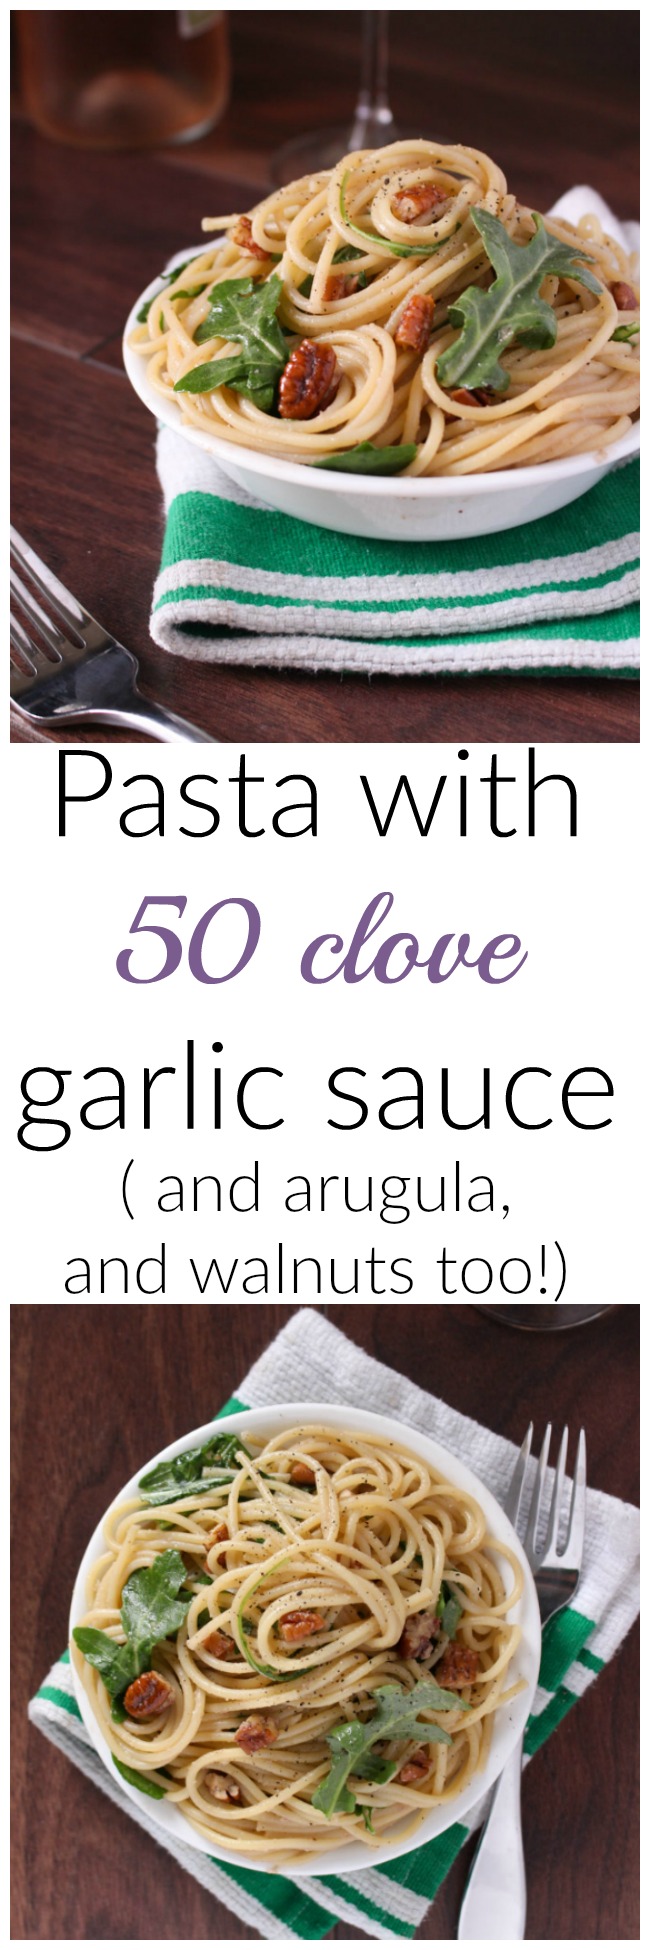 Incredibly yummy and flavorful pasta with 50 clove garlic sauce, with arugula, and walnuts. This sauce is very tasty and you won't have garlic breath after. 